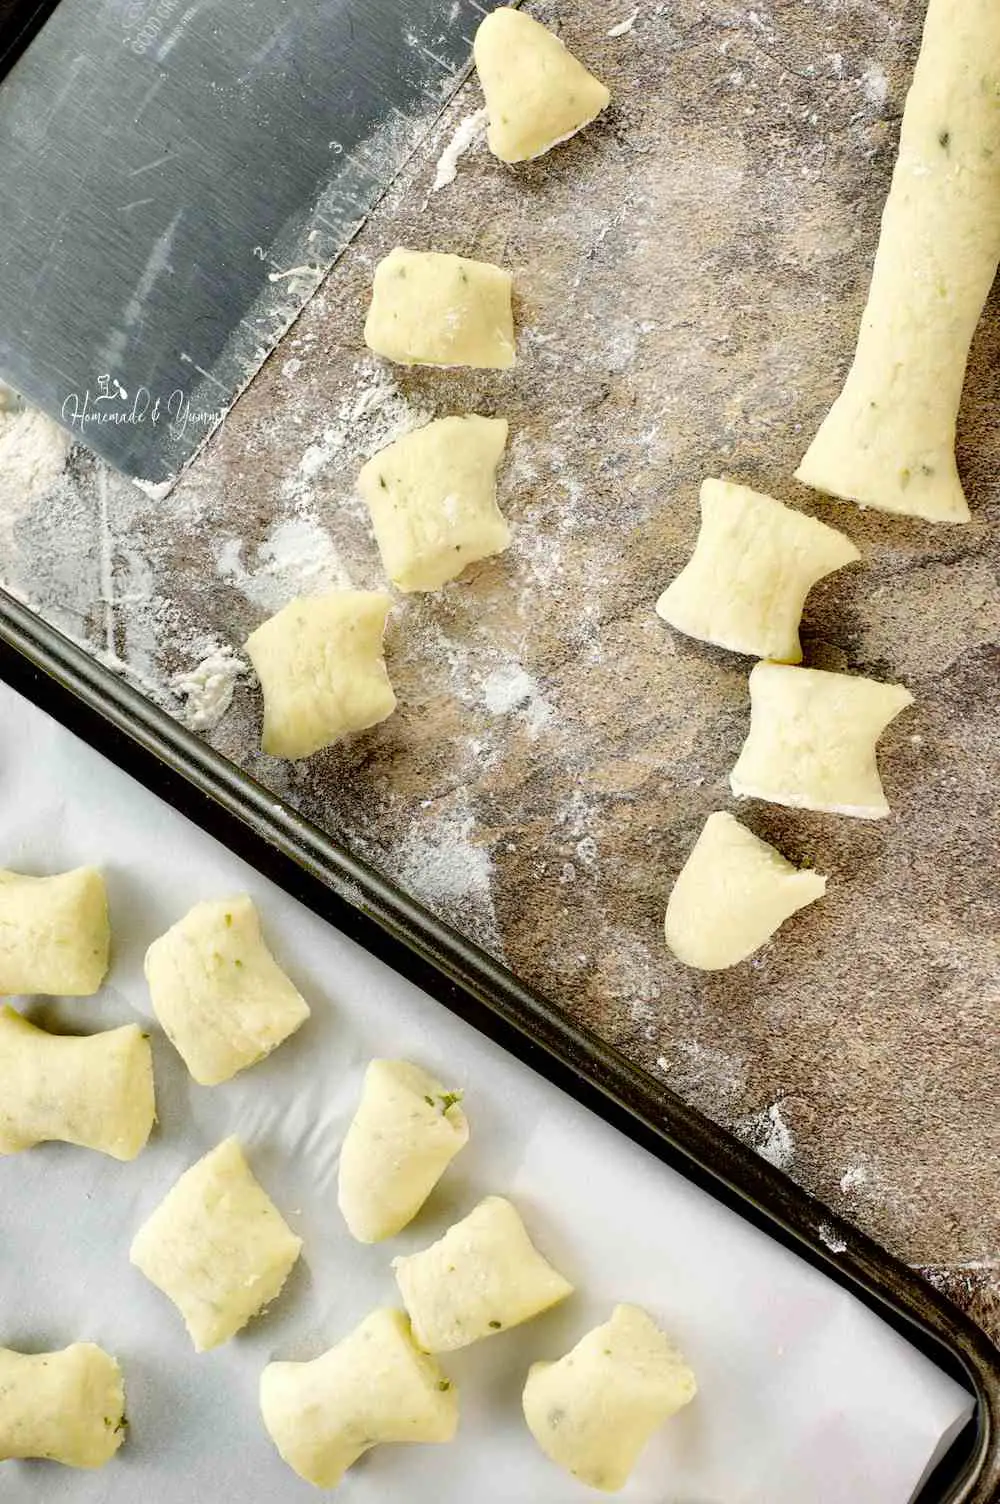 Forming and cutting the gnocchi.